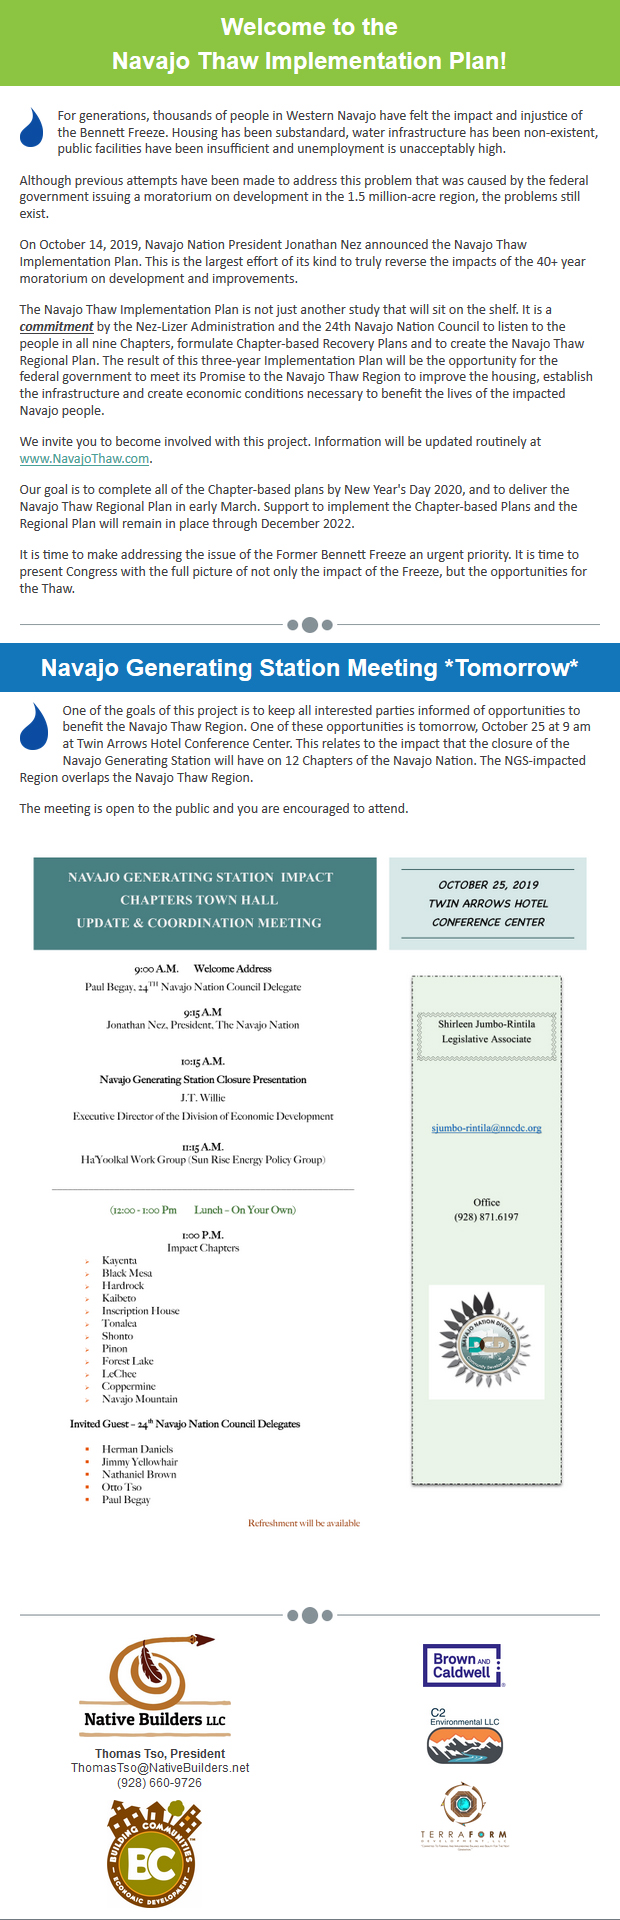 Welcome to the Navajo Thaw Implementation Plan!